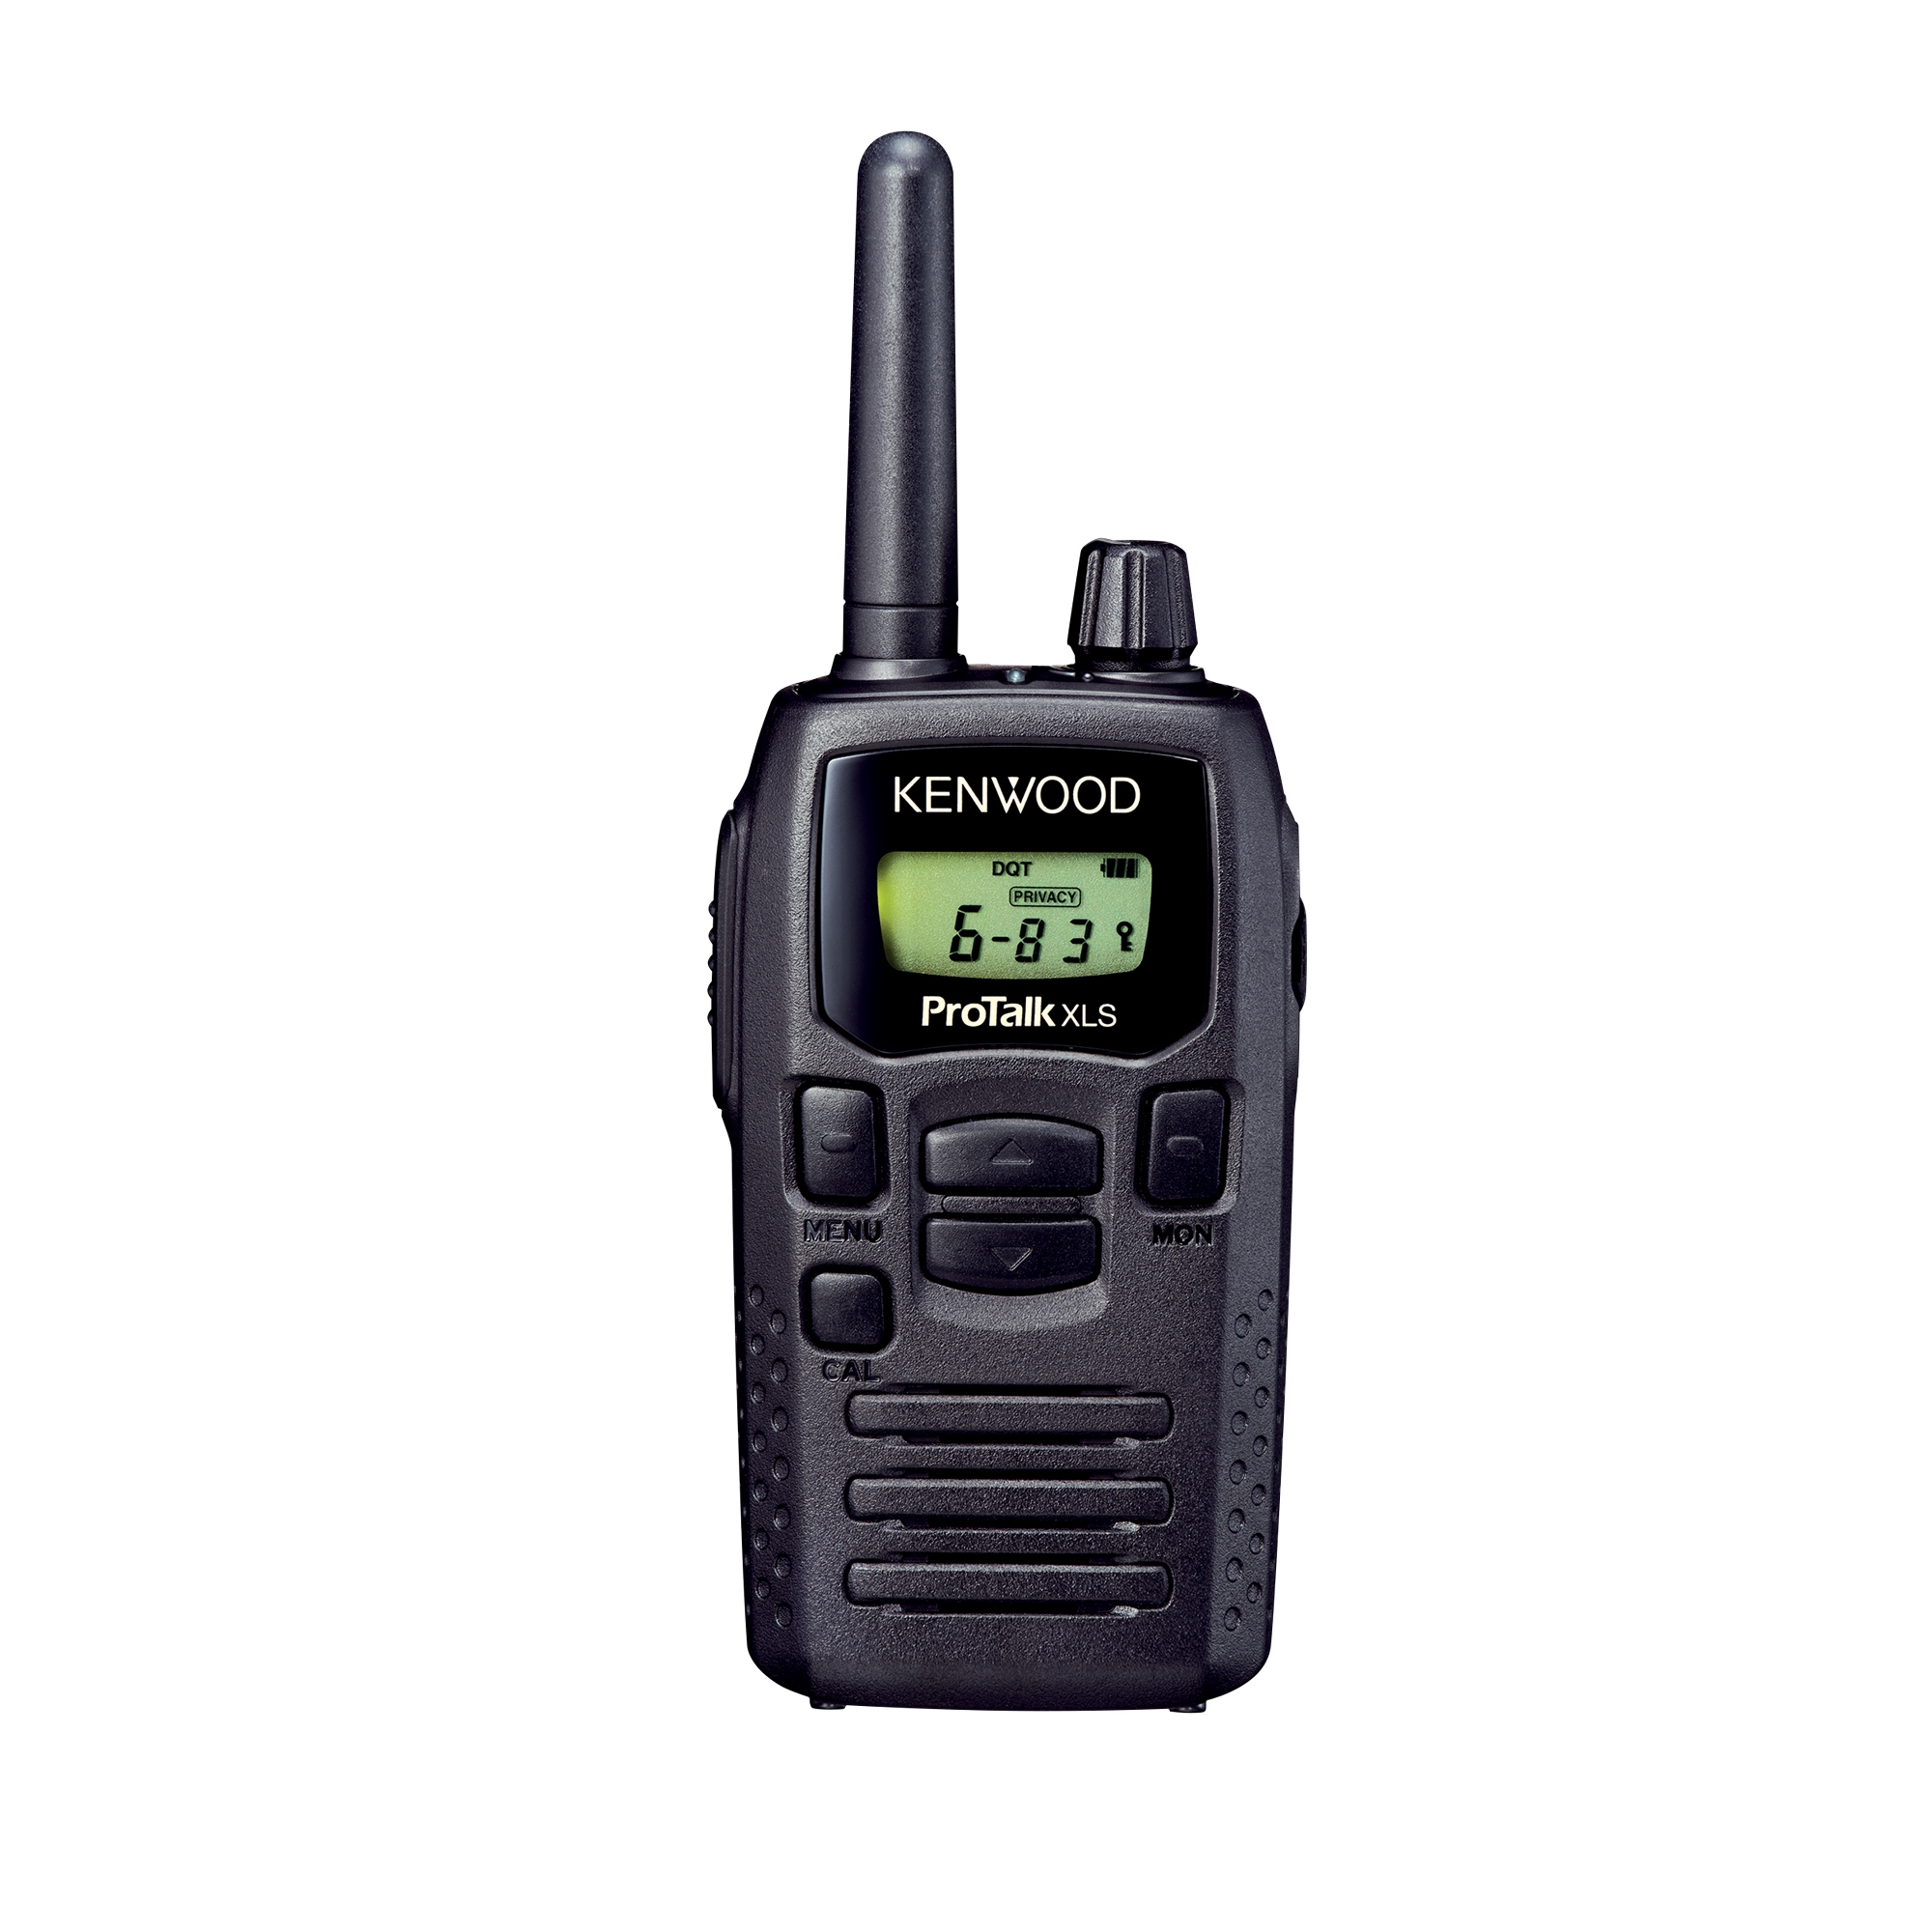 Portable UHF Two-Way Radios & Accessories